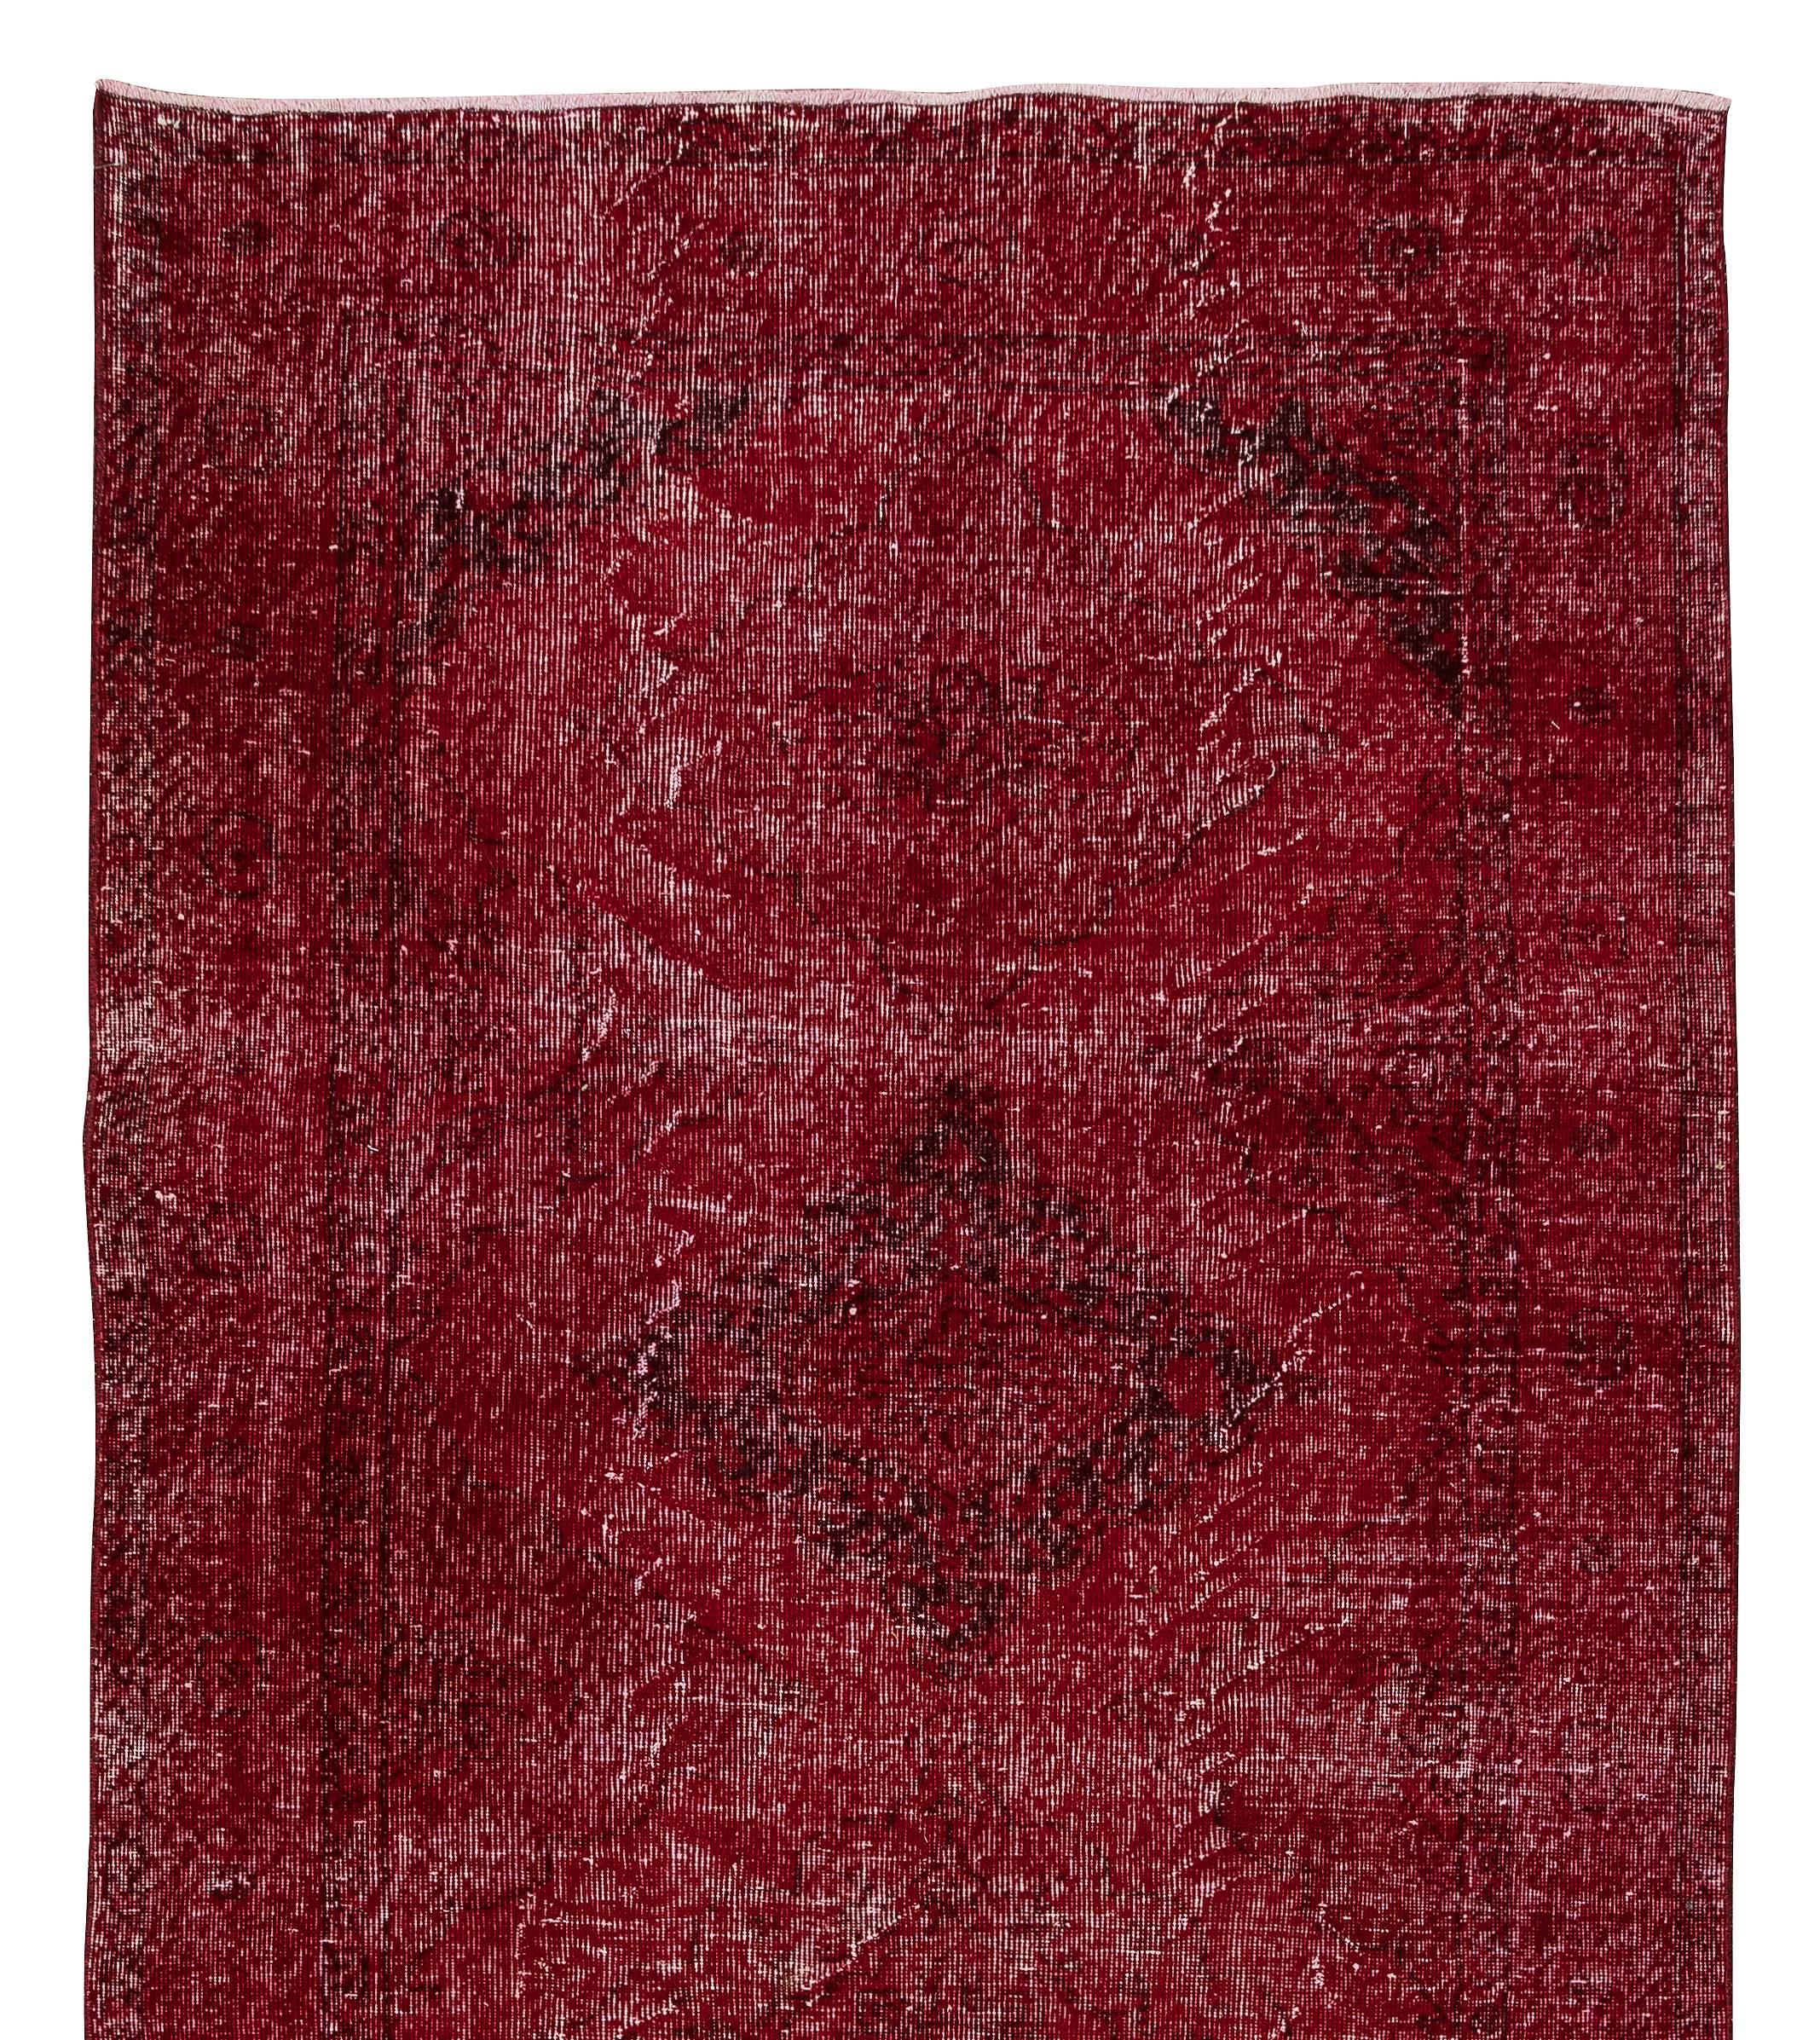 Turkish 5x12 Ft Contemporary Handmade Konya Sille Runner Rug in Red for Hallway Decor For Sale